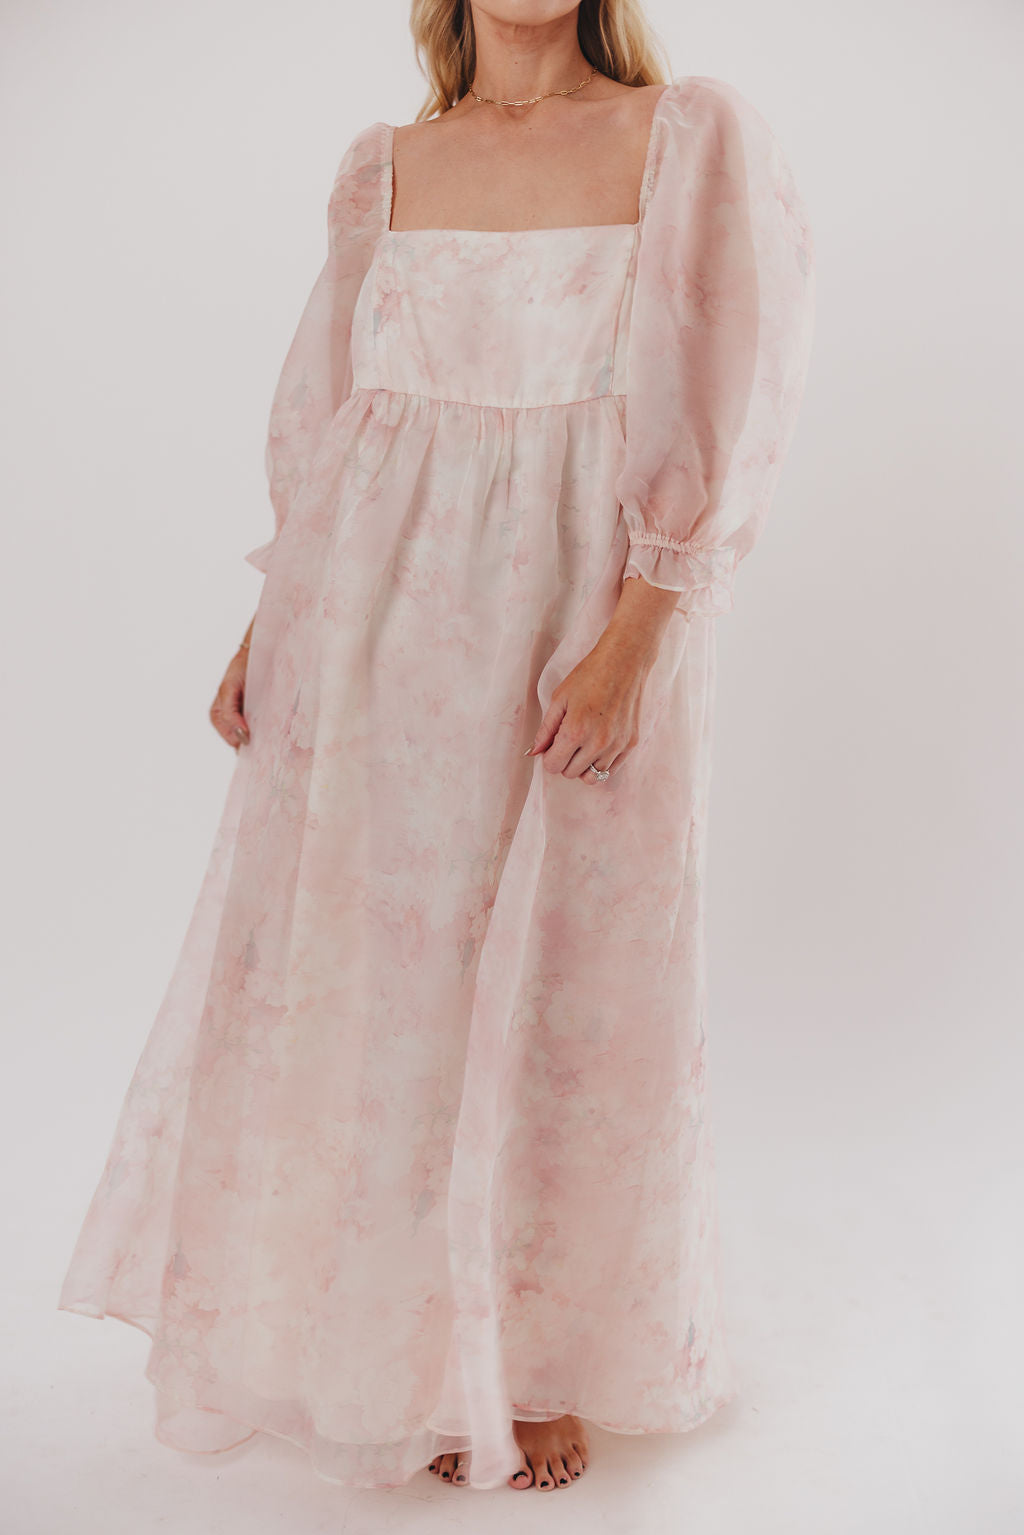 *New* Mona Maxi Dress with Smocking in Pale Pink Floral - Bump Friendly & Inclusive Sizing (S-3XL)